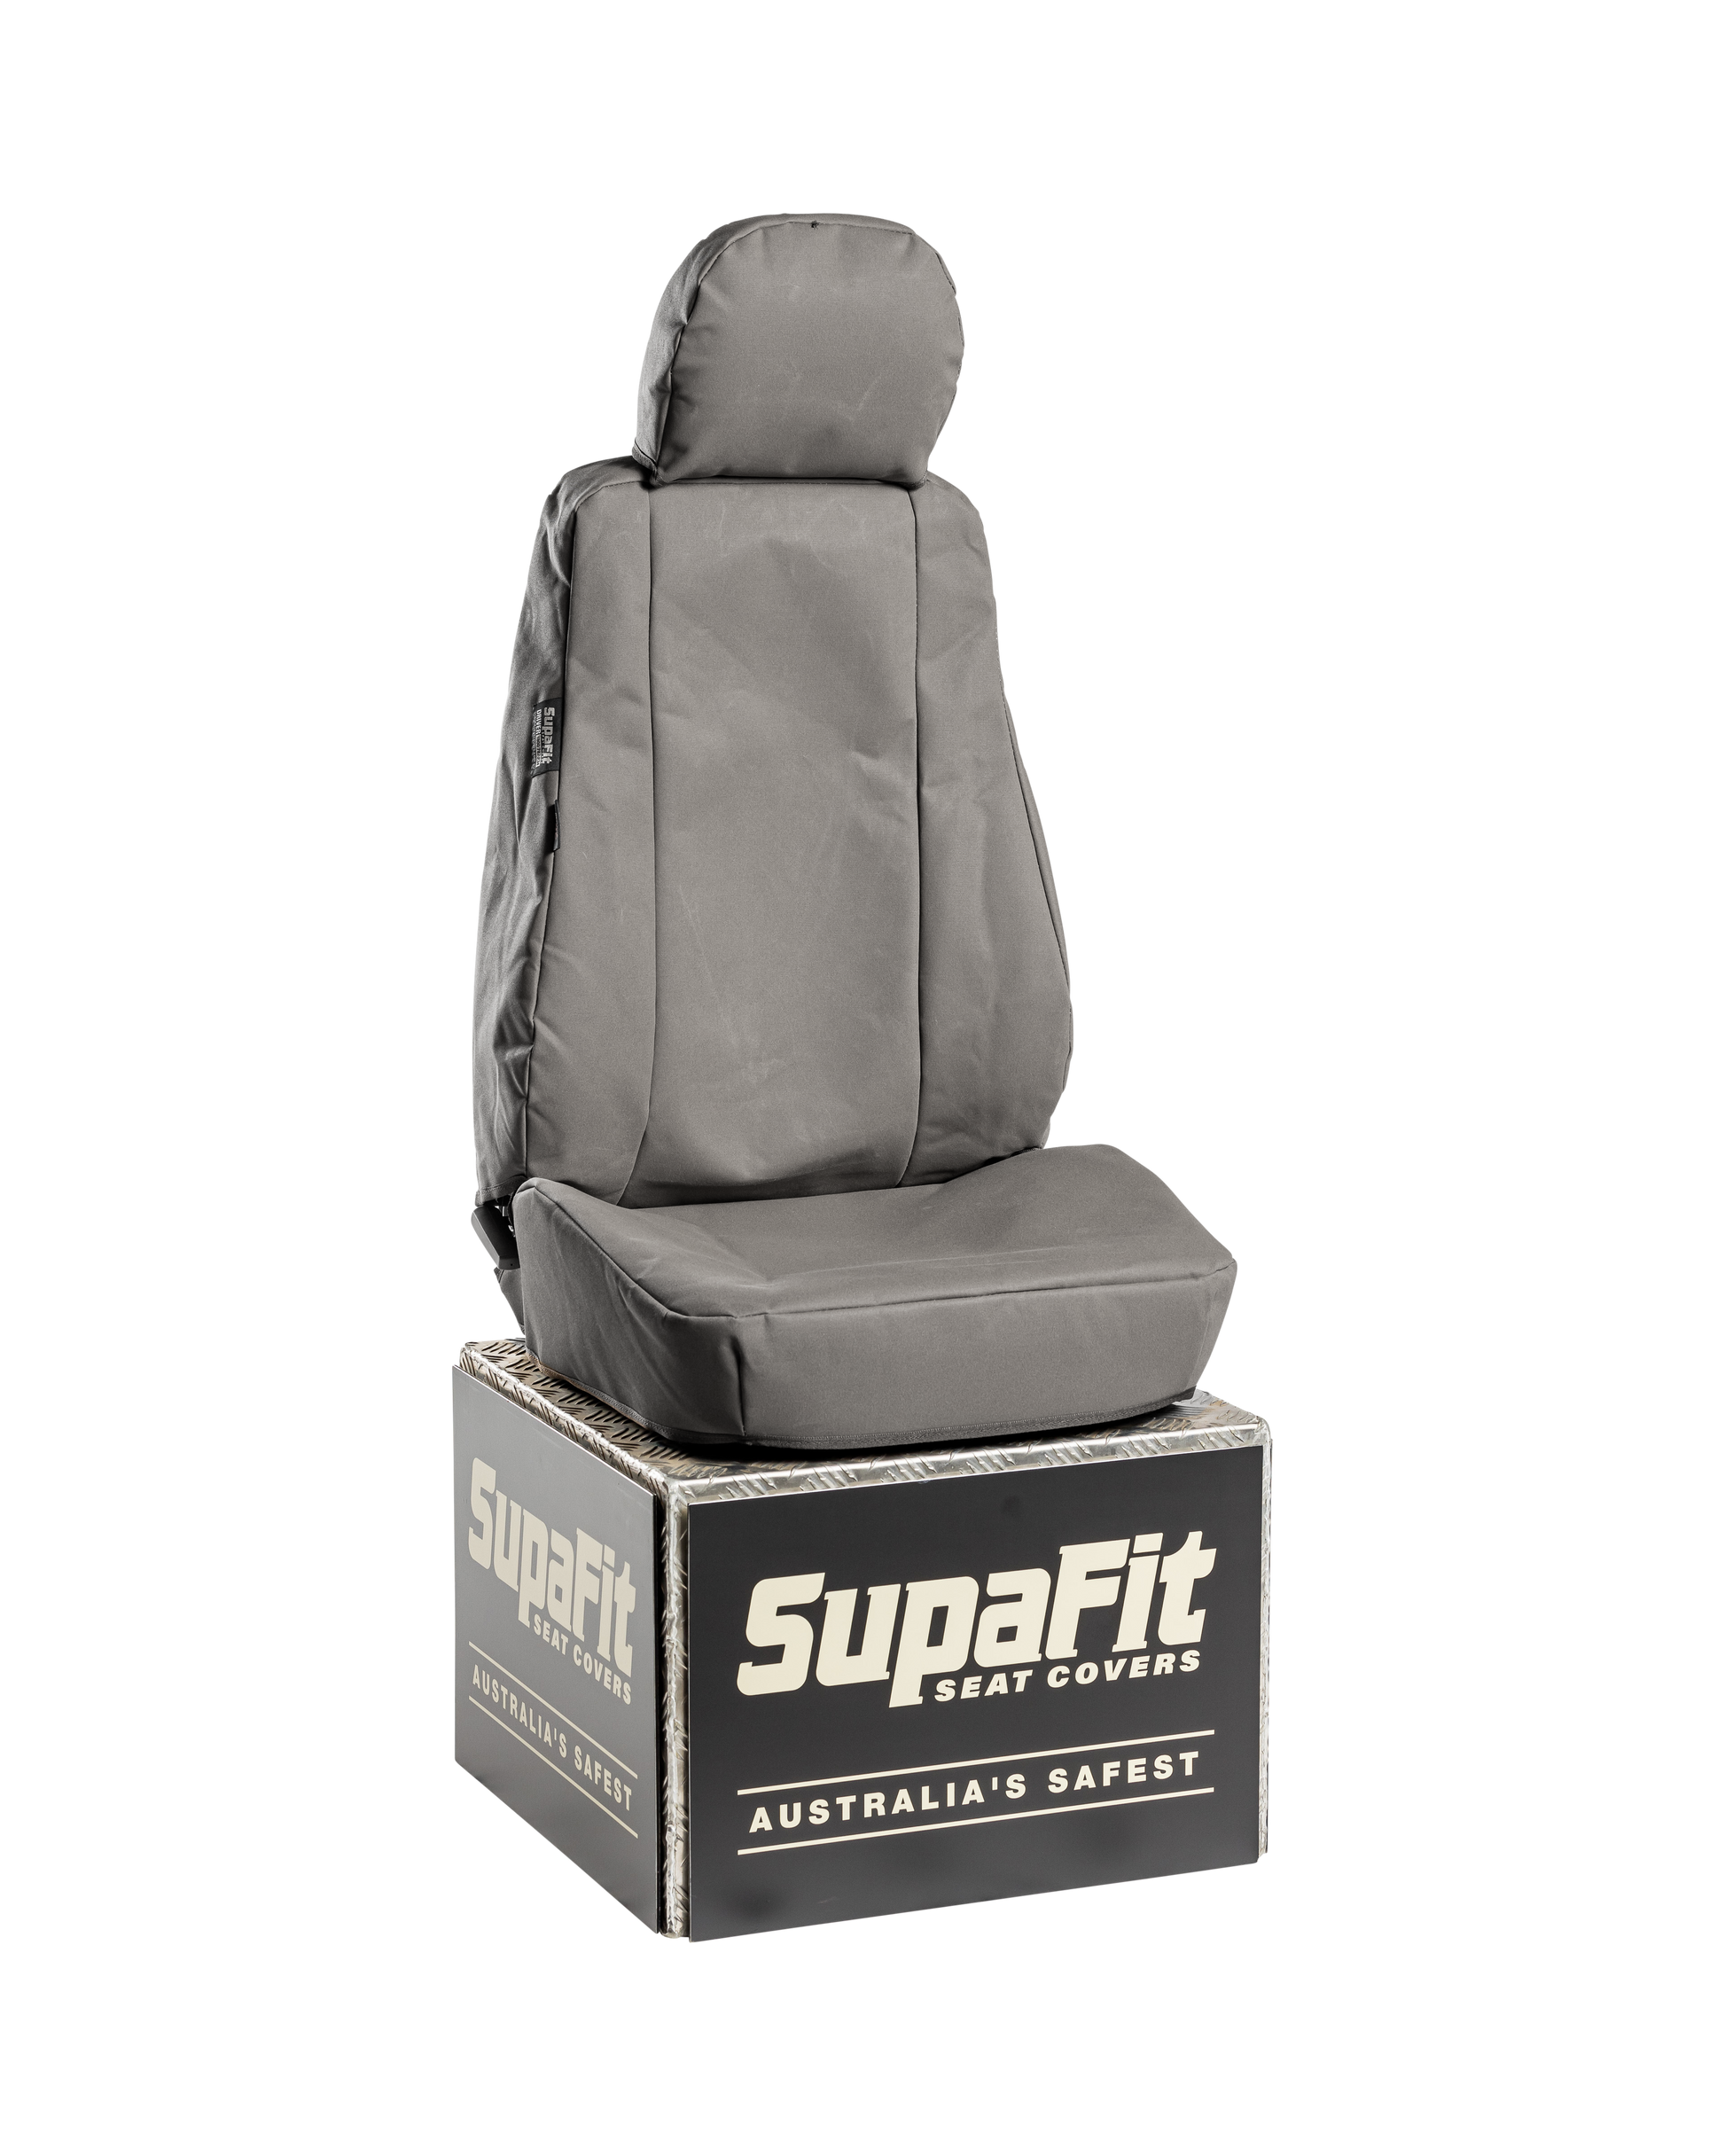 SUPAFIT Seat covers driver & passenger seats - Essential4x4